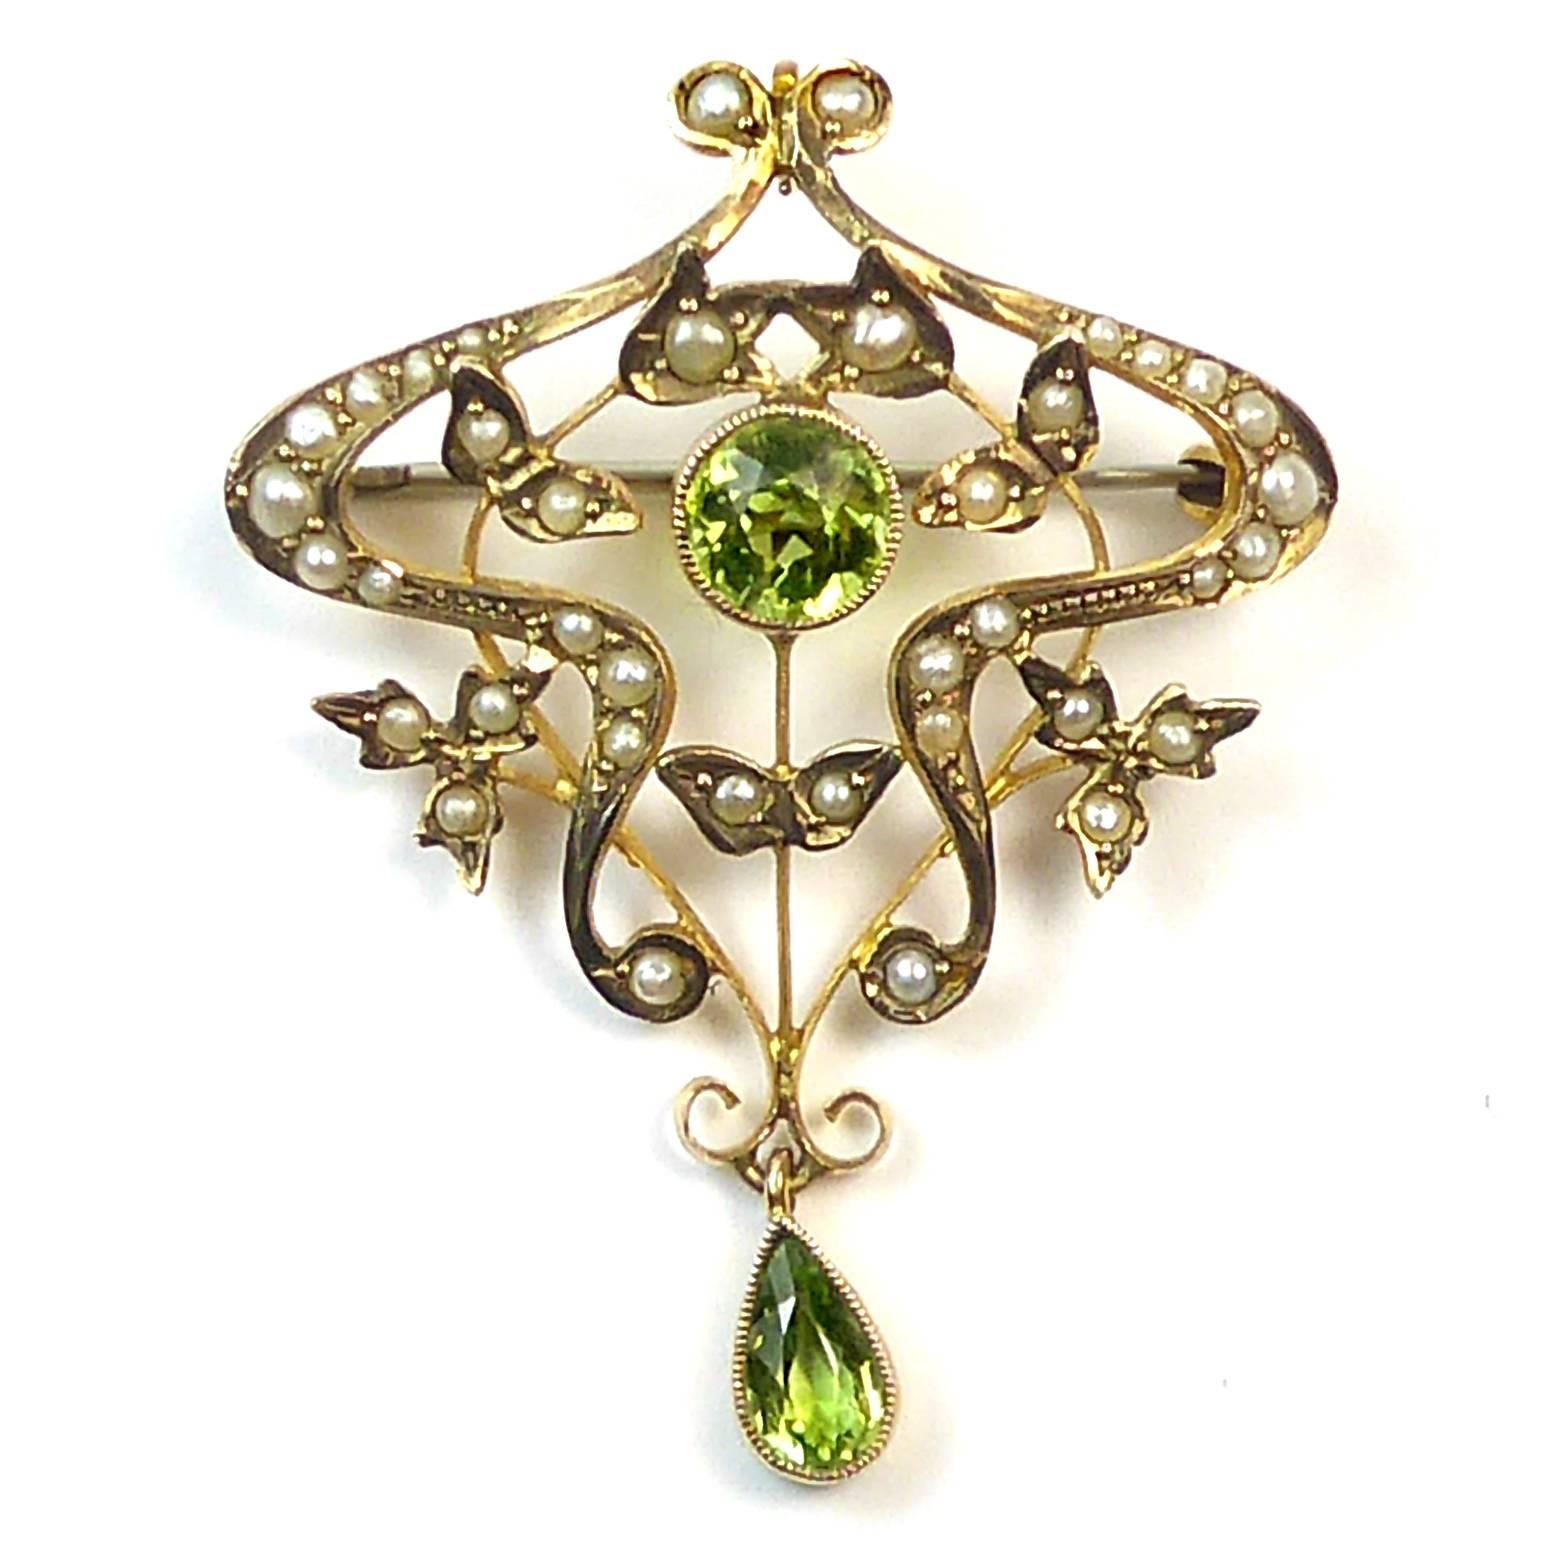 An exquisitely proportioned Art Nouvea pendant centring on a round millegrain set peridot of rich green colour.  The peridot is surrounded by a swirling gold wire-work frame encrusted with pearls, the frame being puncutated by pearl set leaves and